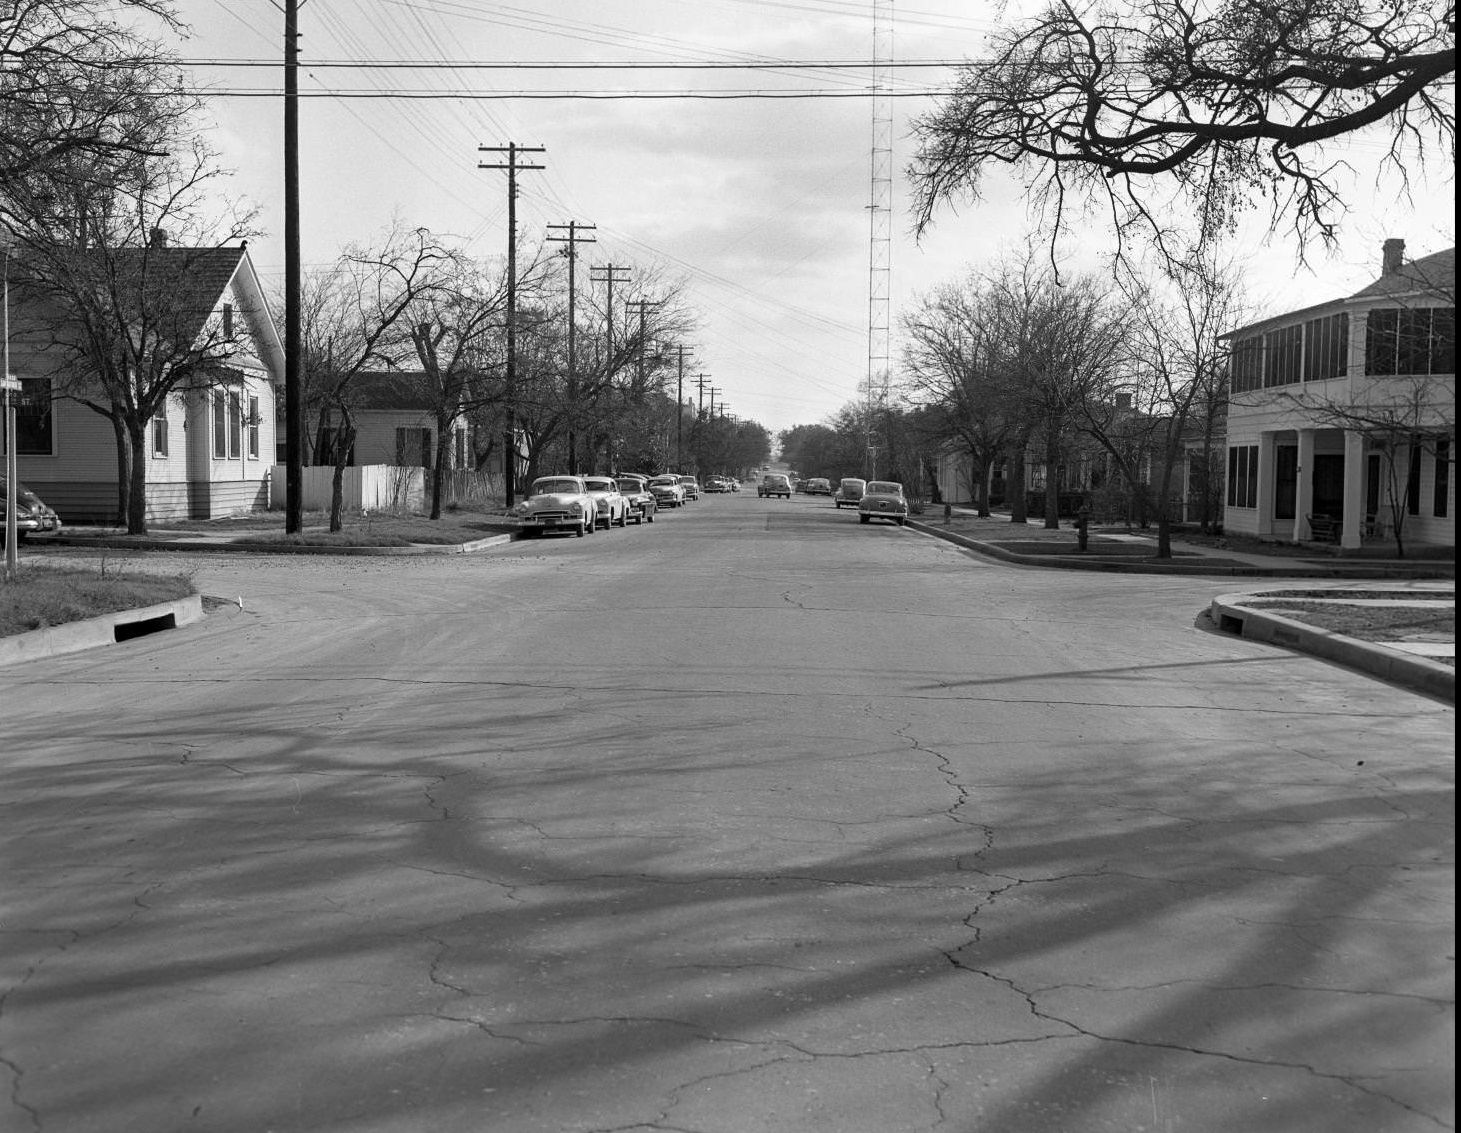 Looking south up San Antonio Street from the intersection at 16th Street, 1951